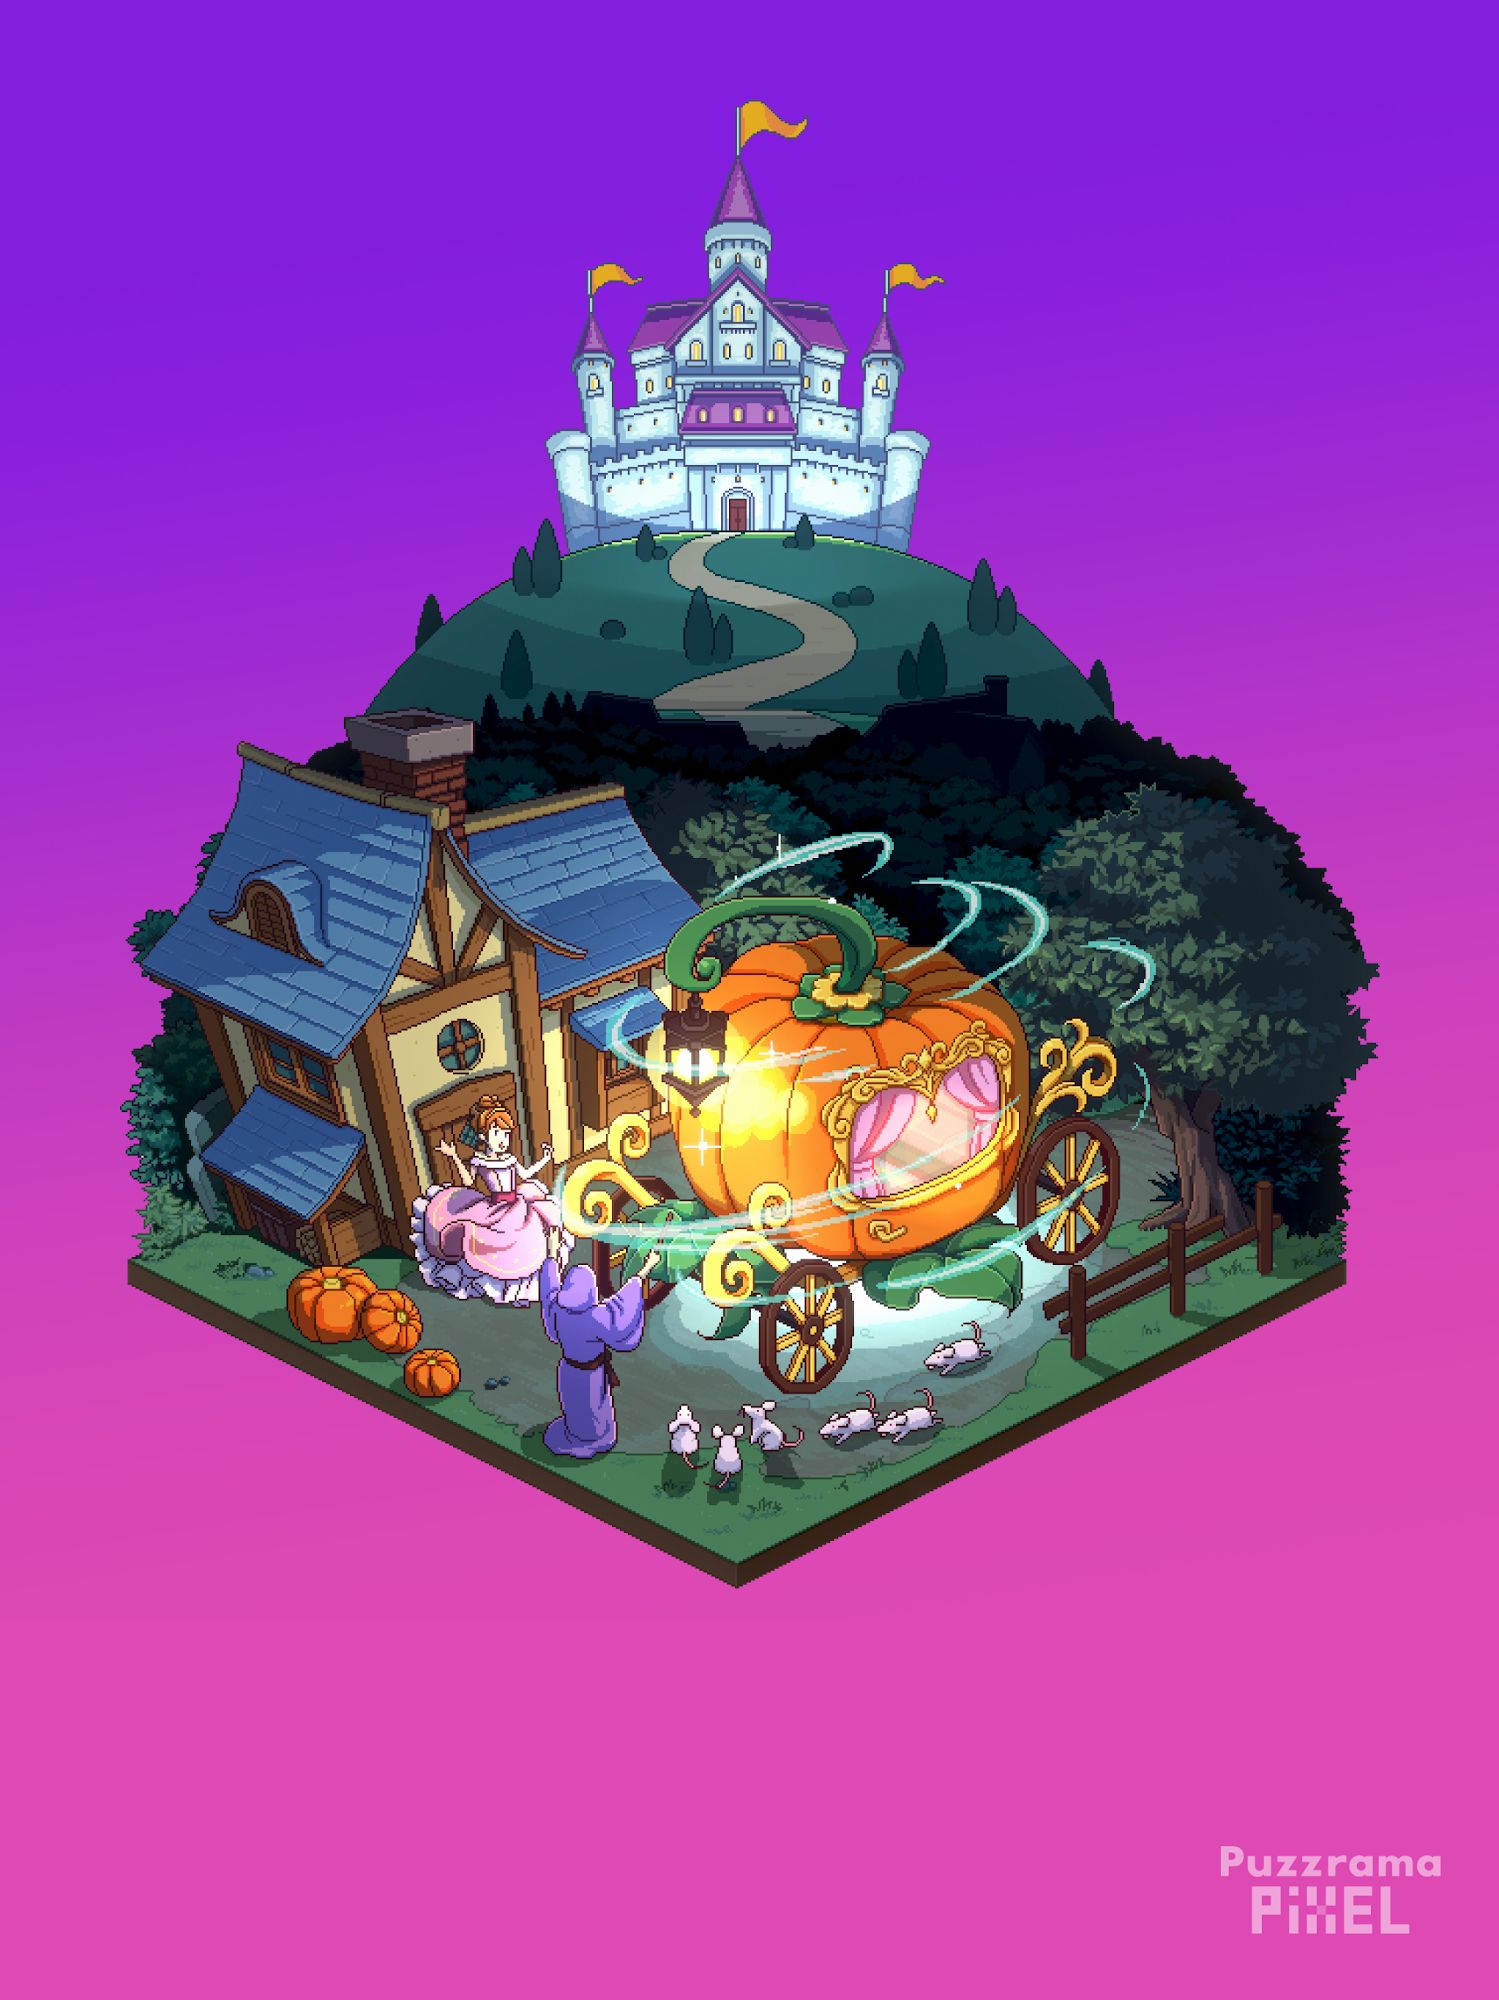 Puzzrama Pixel for Android